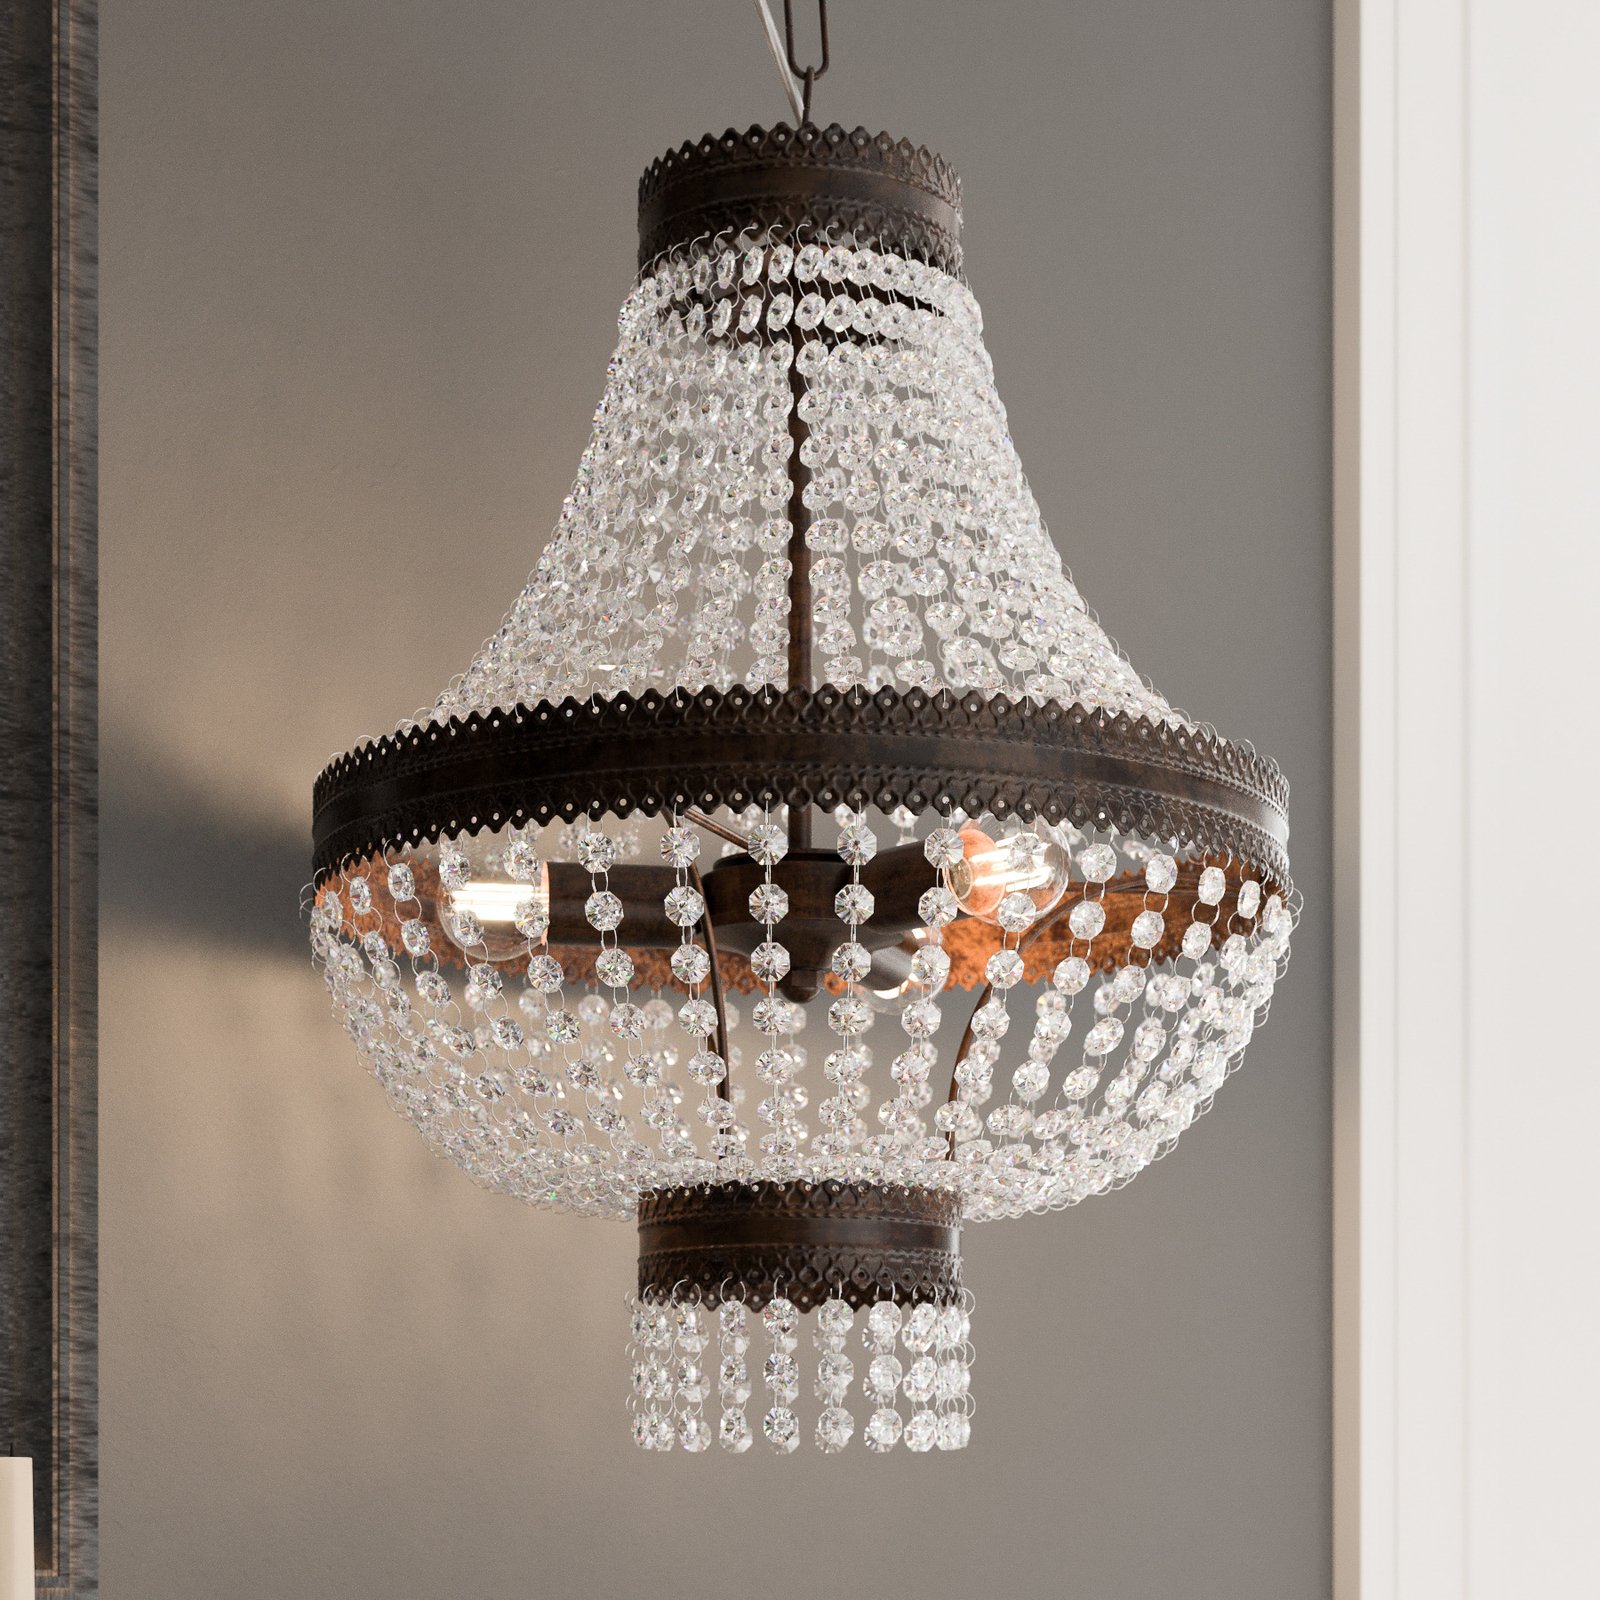 Impero hanging light with crystal elements